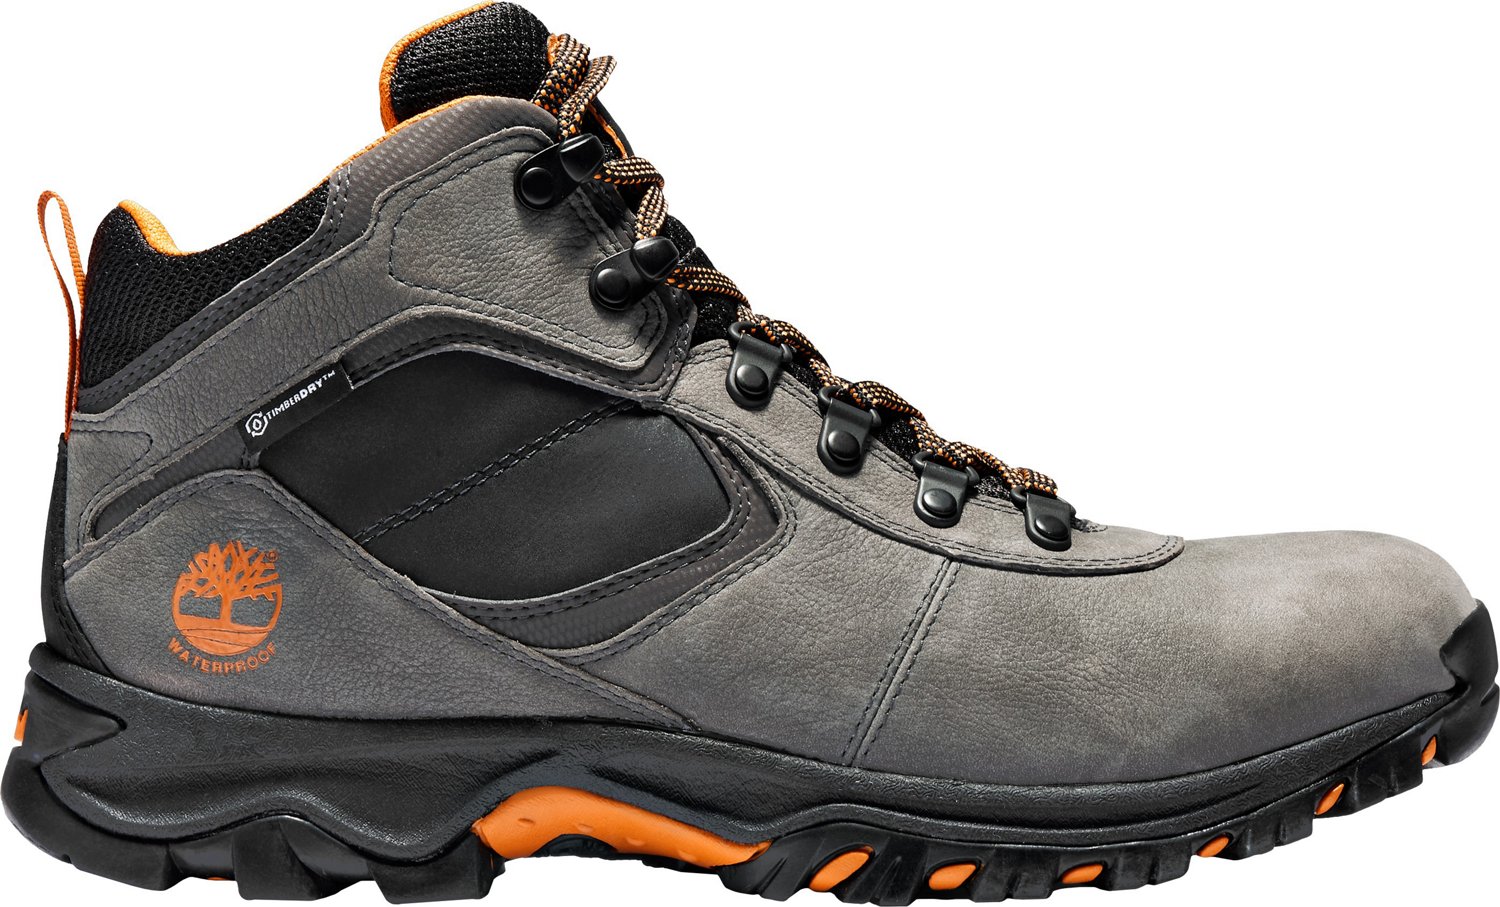 Timberland Mens Mt. Maddsen Waterproof Mid Hiking Boots